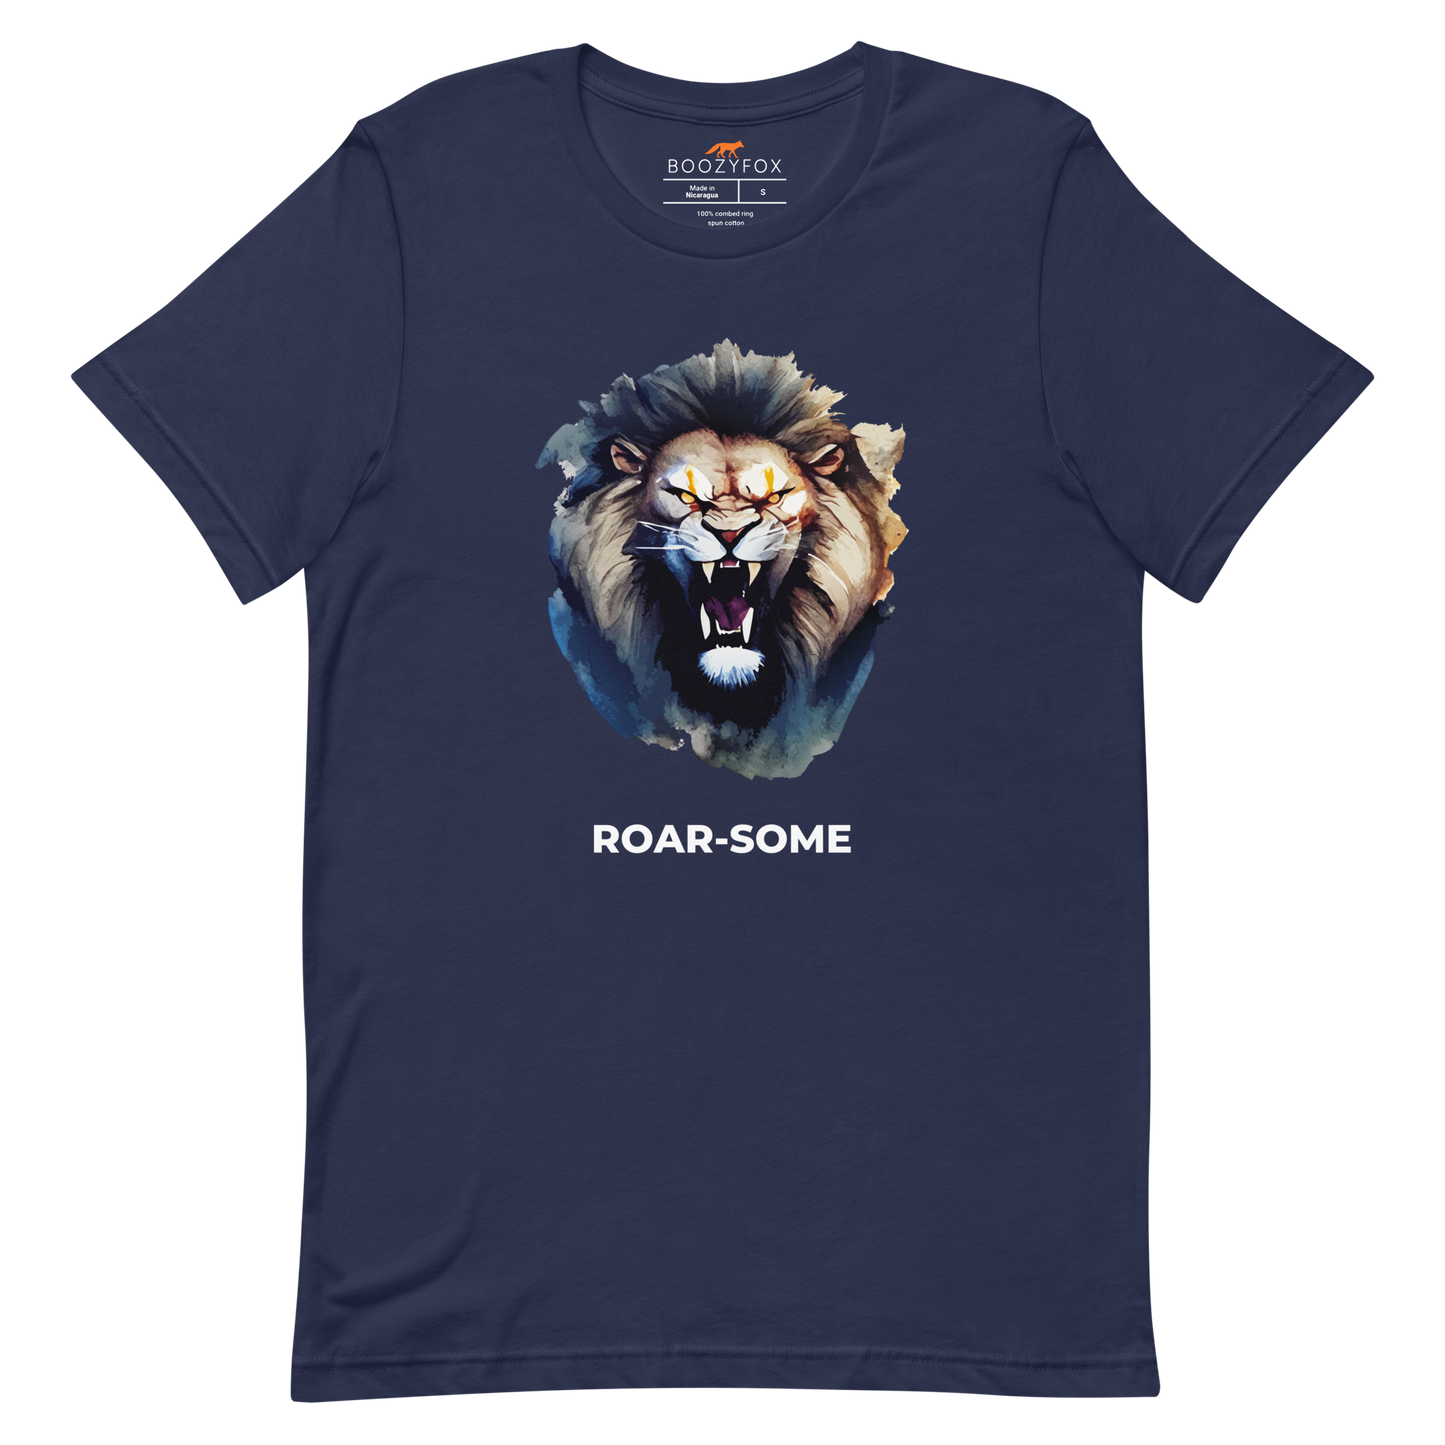 Navy Premium Lion Tee featuring a Roar-Some graphic on the chest - Cool Graphic Lion Tees - Boozy Fox